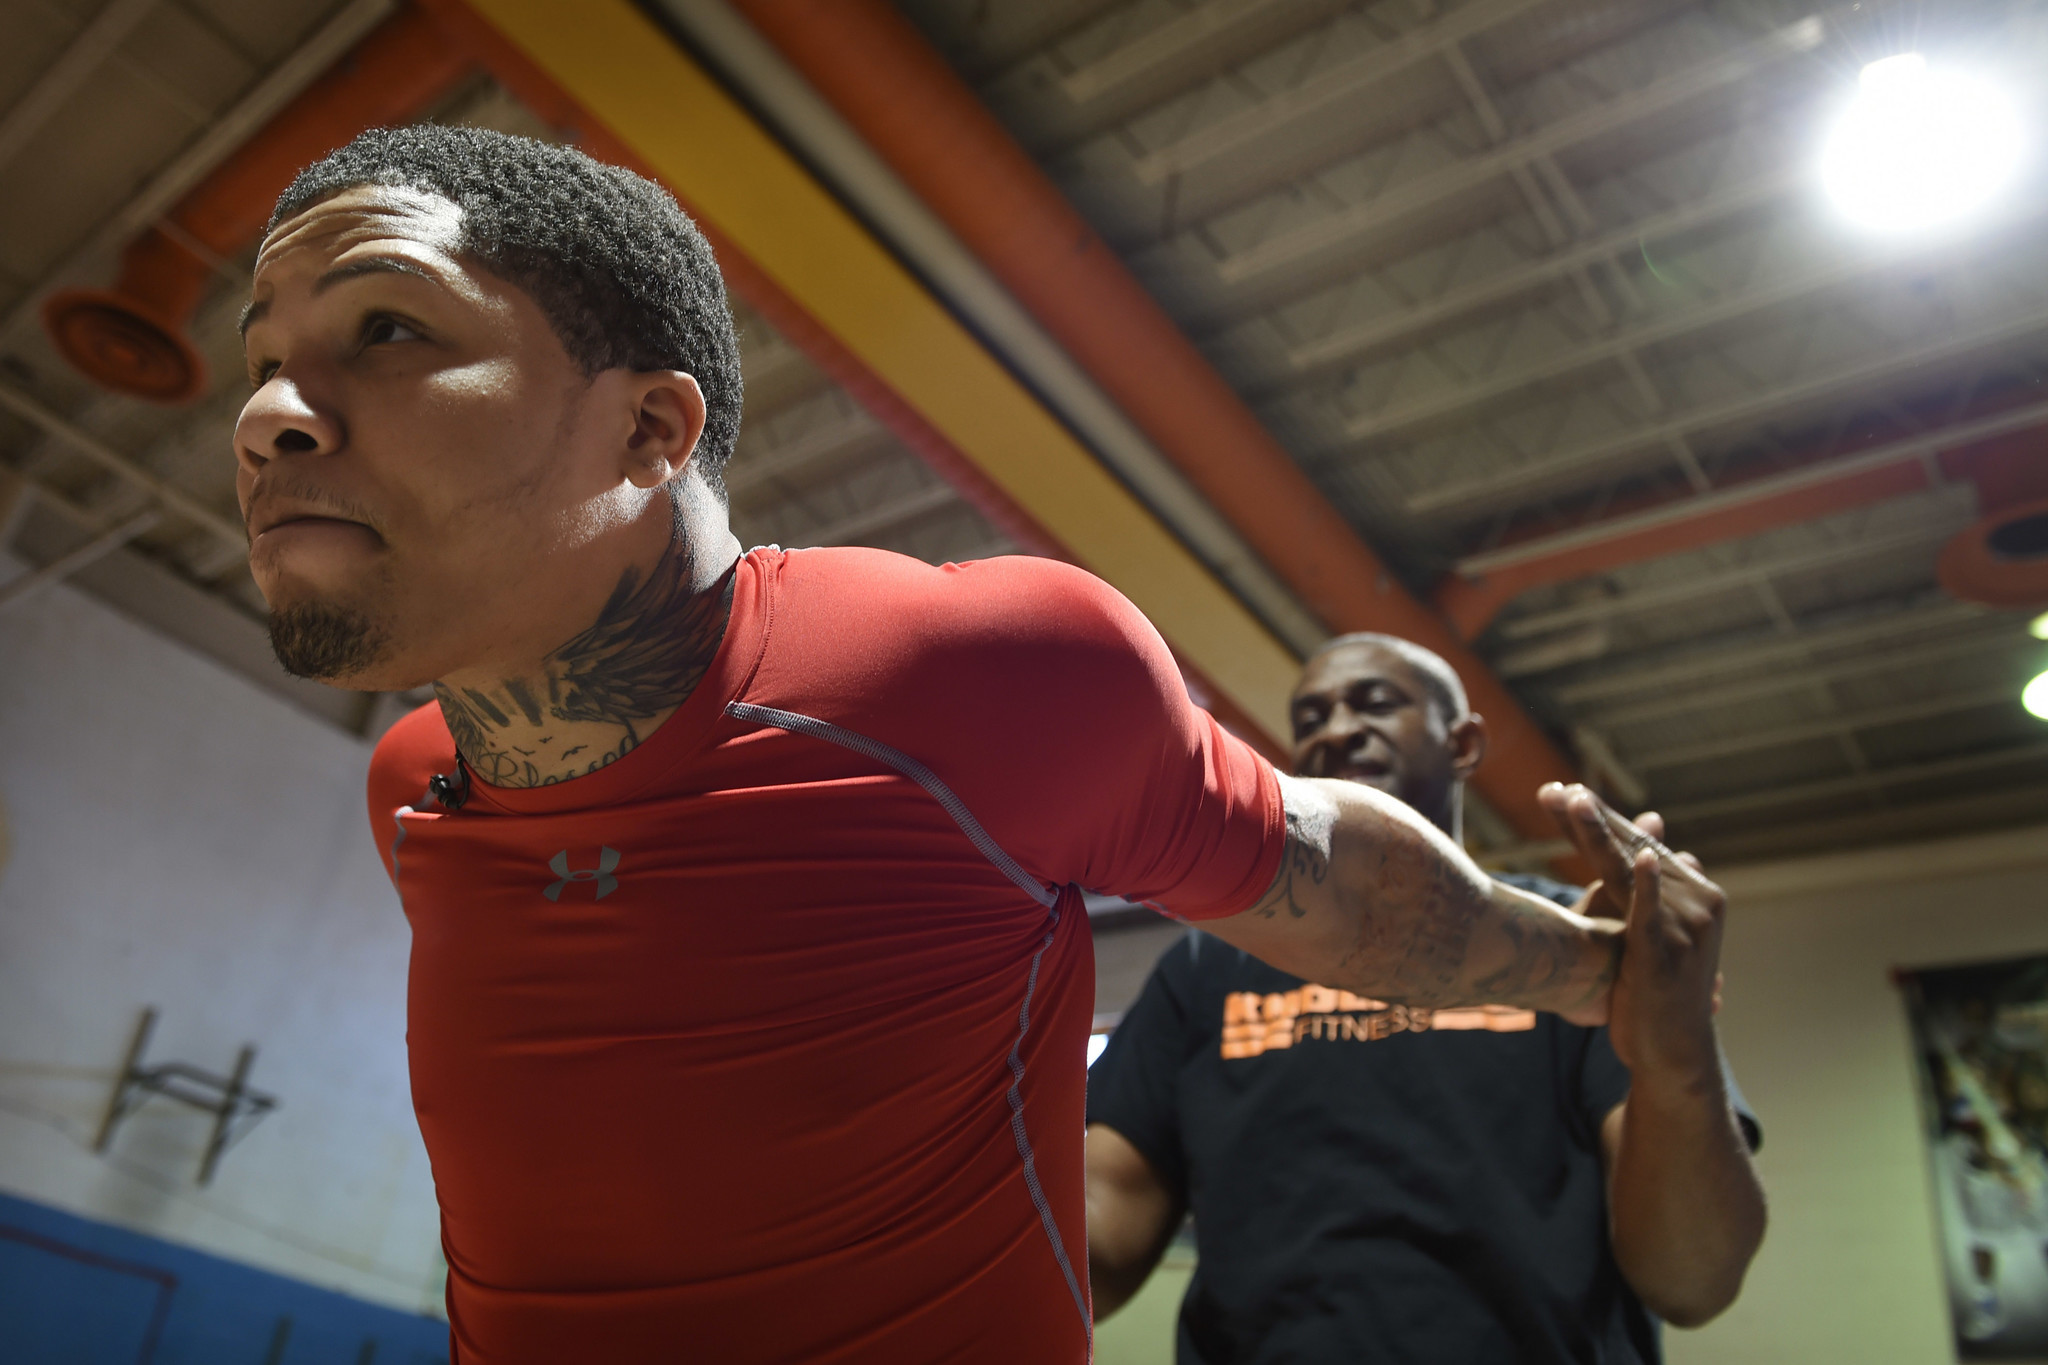 Against the ropes, champ Gervonta Davis comes out fighting after friend ...